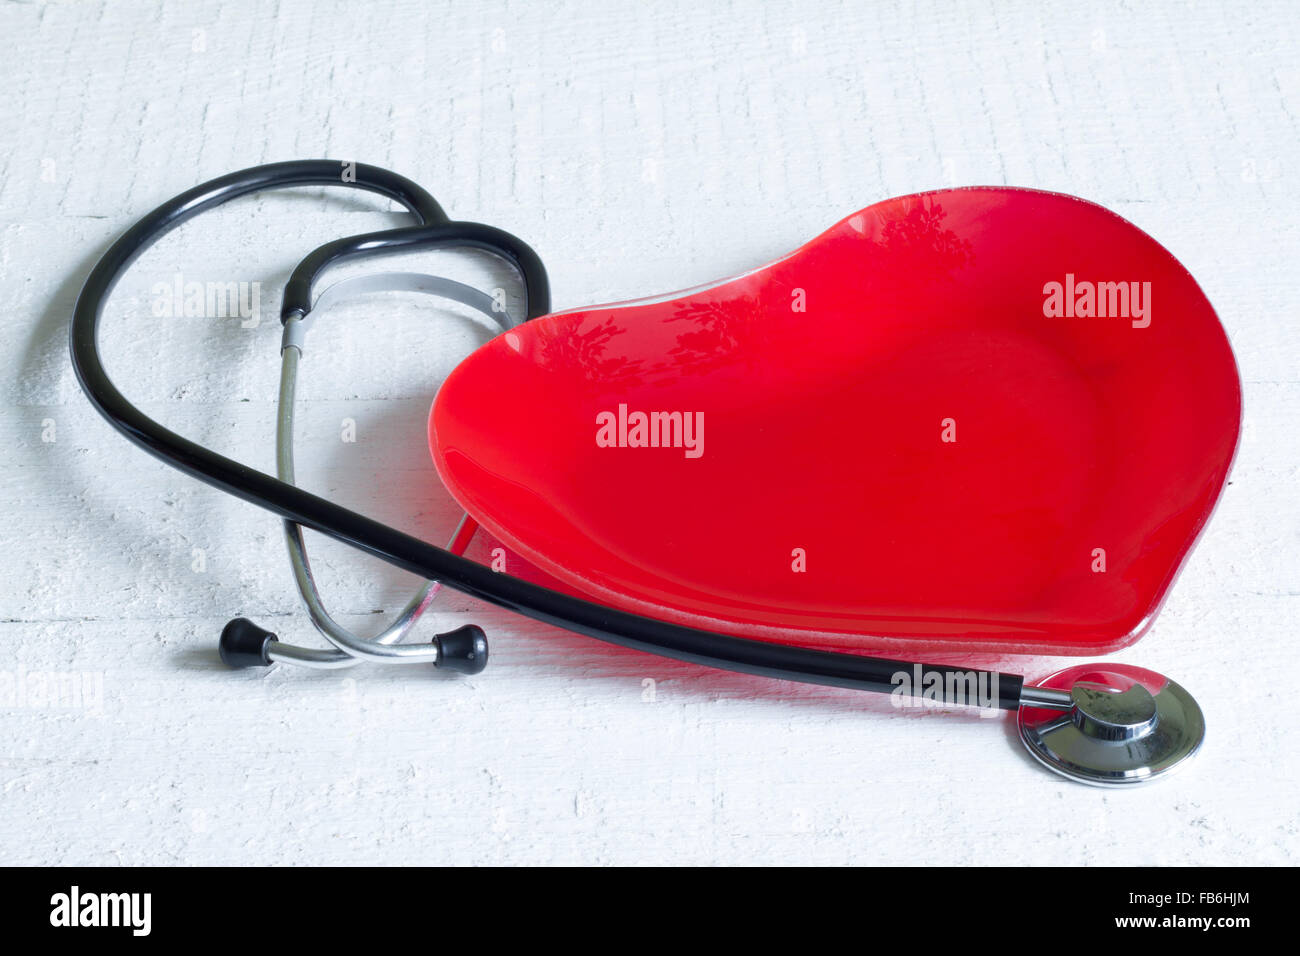 Stethoscope and a red heart plate diet concept on white boards Stock Photo